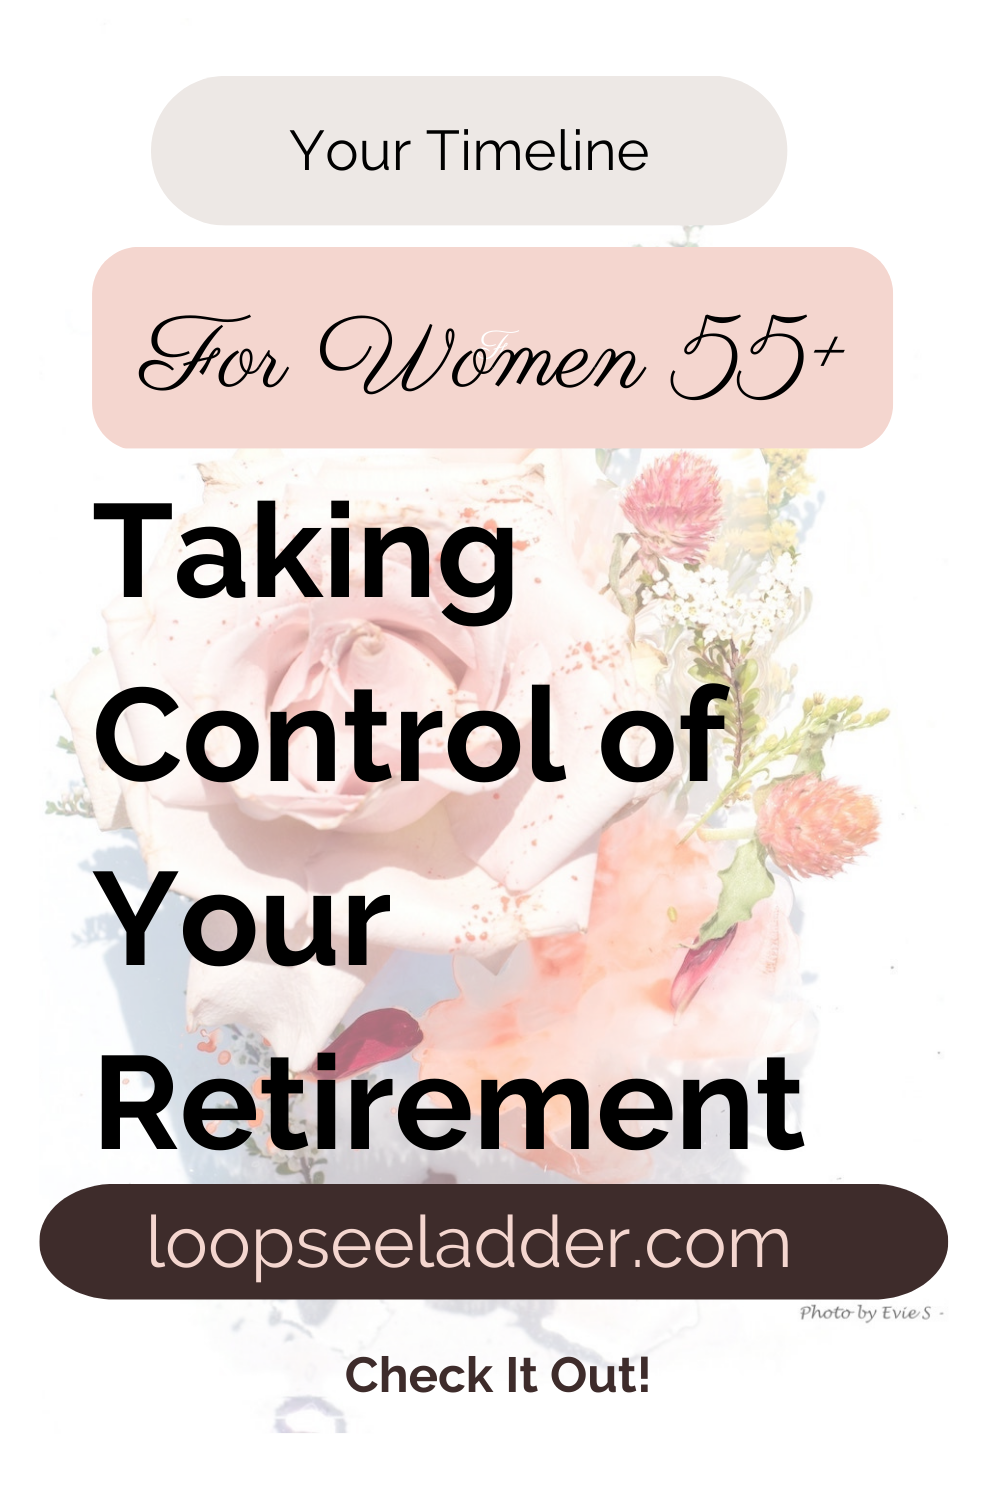 Women 55+ Taking Control of Their Retirement